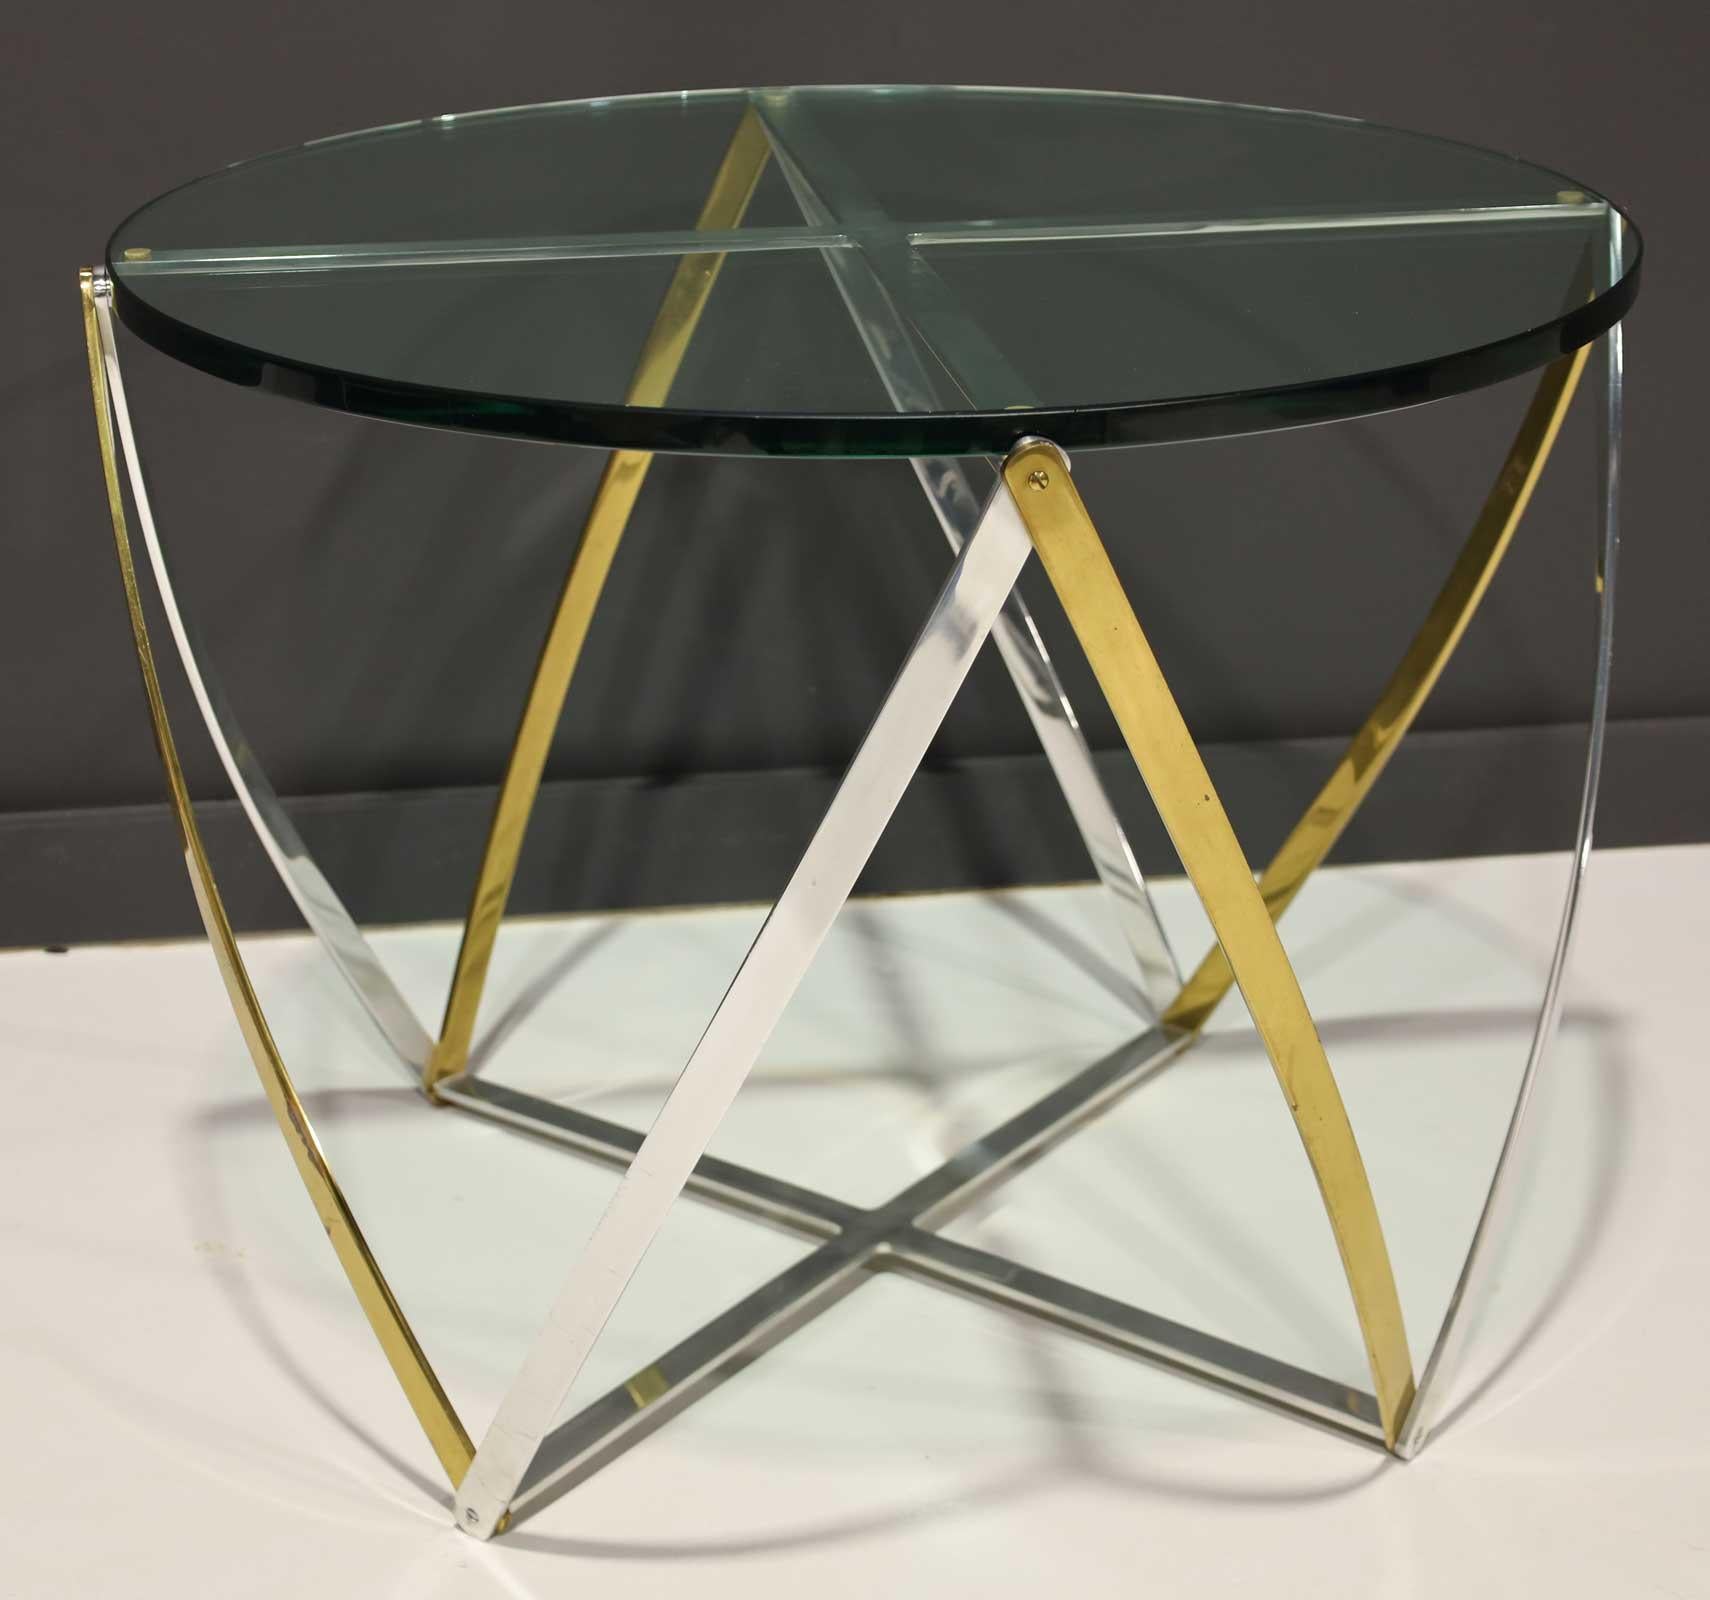 North American Large John Vesey Brass and Brushed Aluminum Table 1970s, Glass Top For Sale